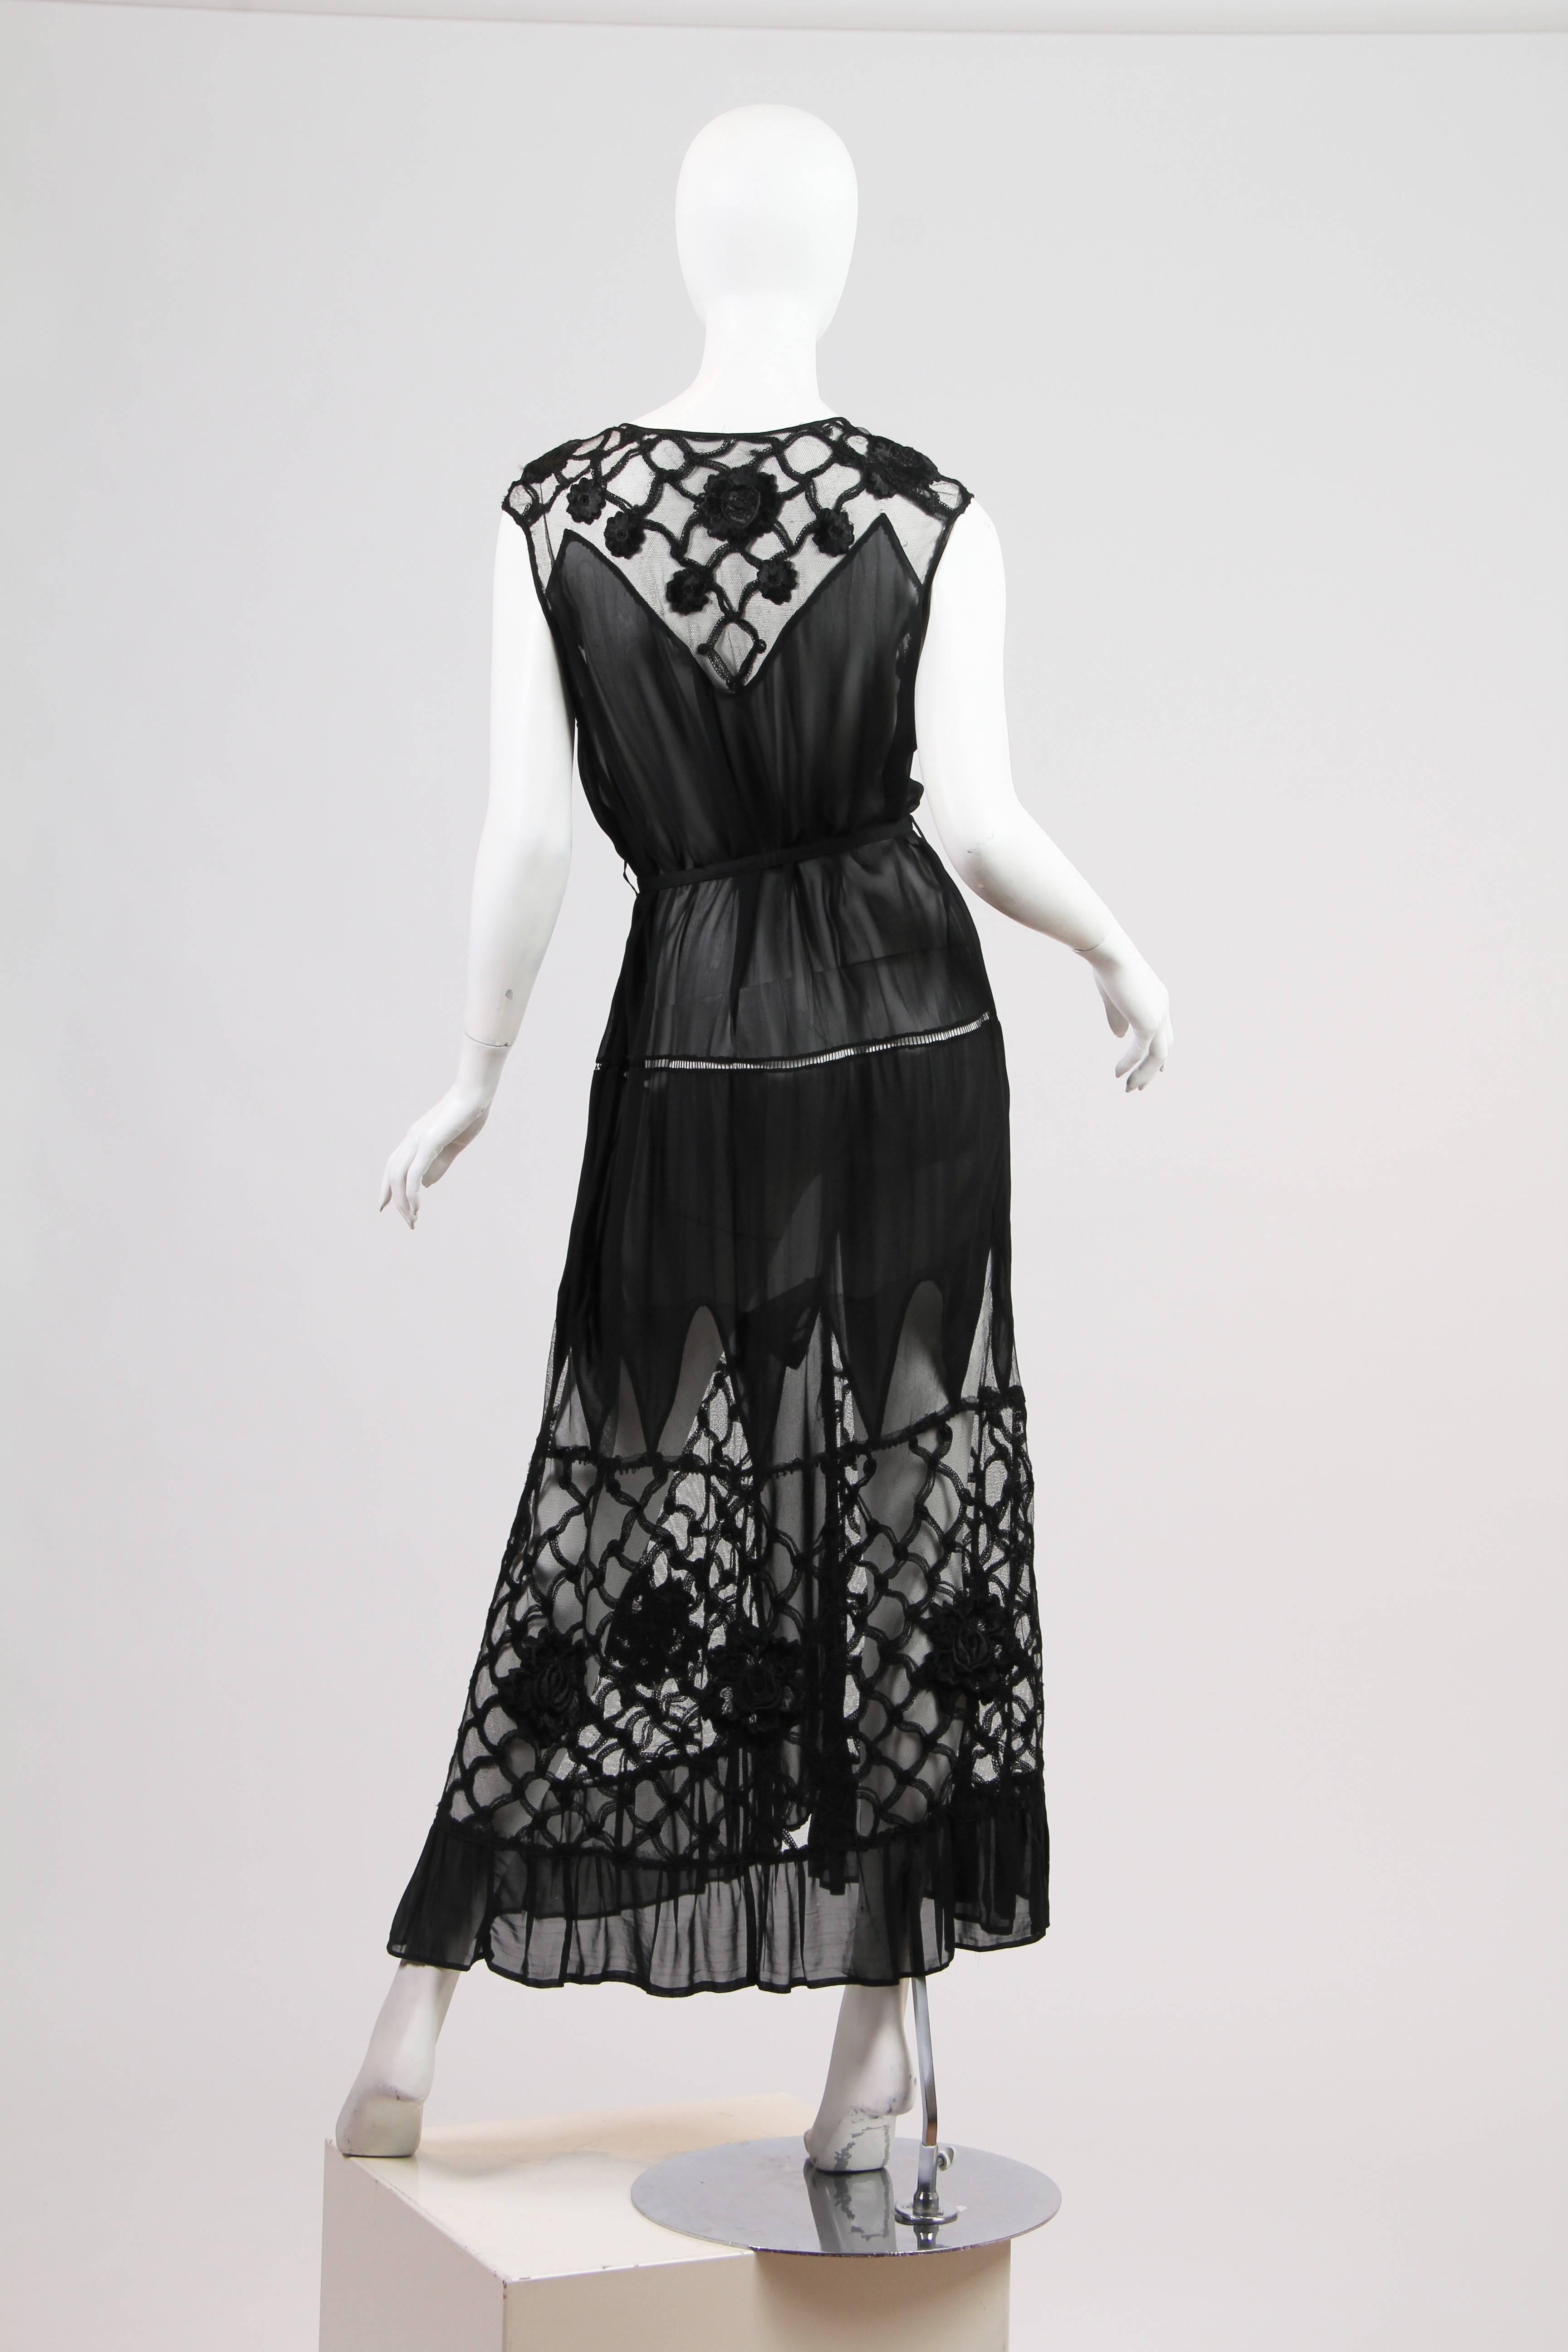 Early 1920s Chiffon and Lace Dress. Dress is belted to show how it would look with a belt. The original dress would never have had a belt and the belt does not come with this.